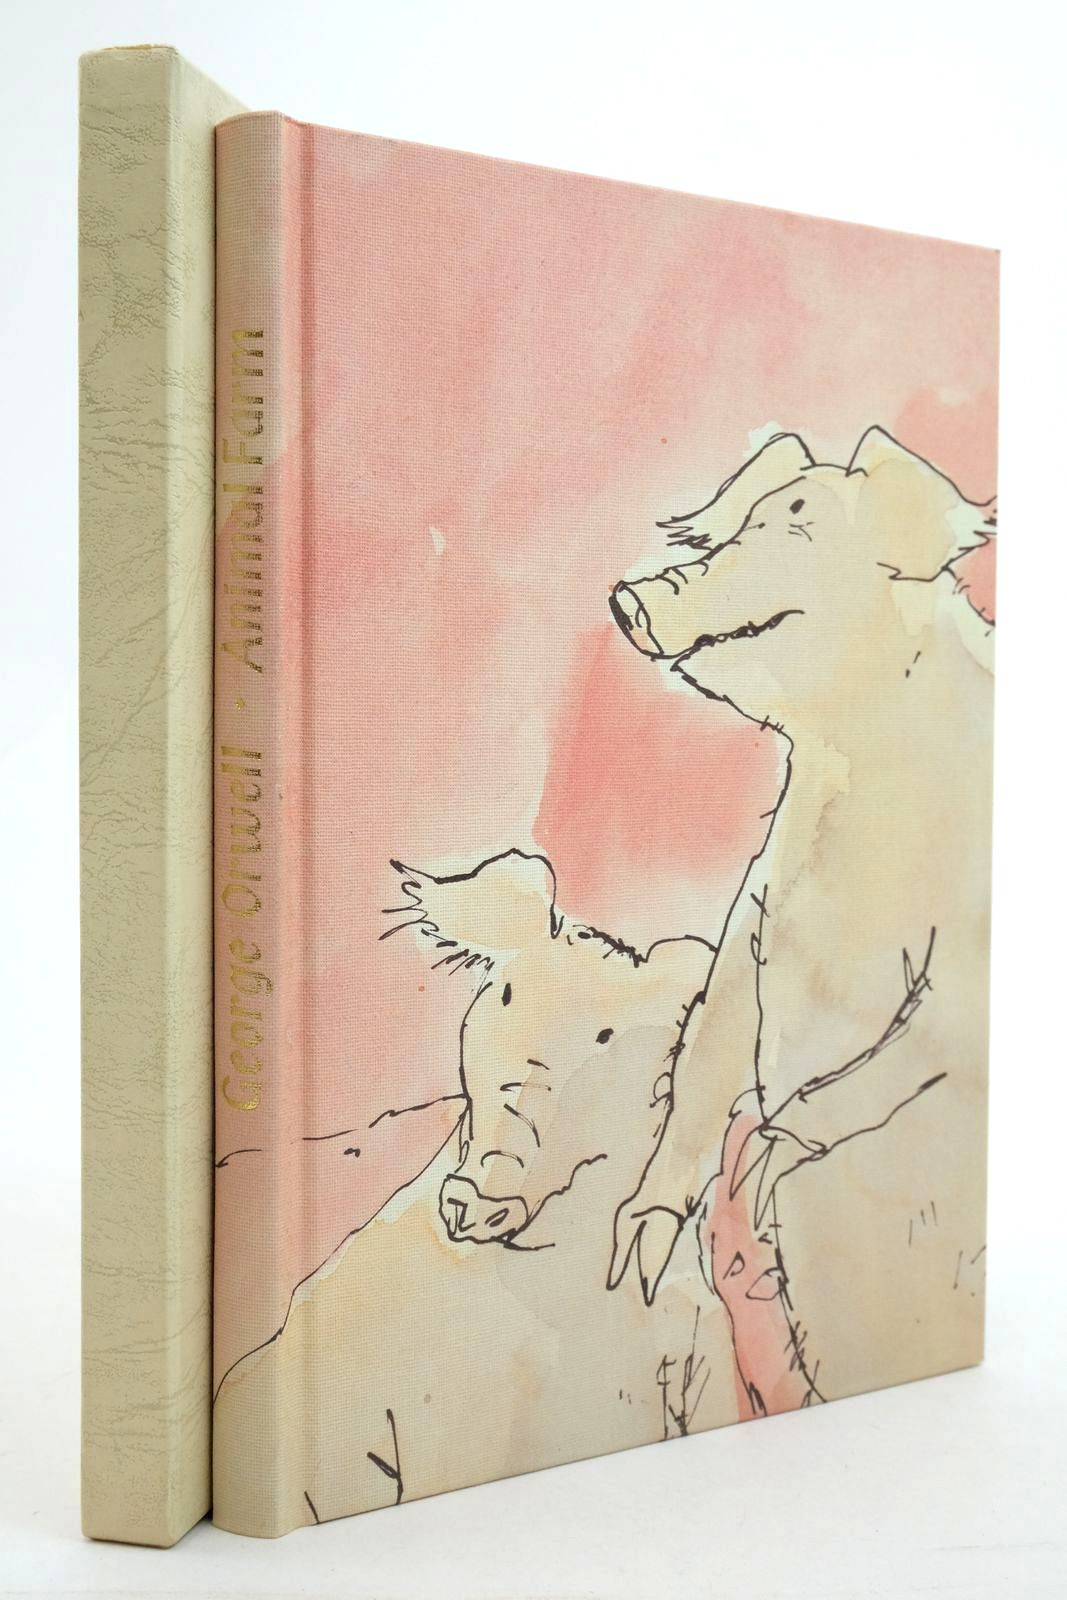 Photo of ANIMAL FARM: A FAIRY STORY written by Orwell, George illustrated by Blake, Quentin published by Folio Society (STOCK CODE: 2138262)  for sale by Stella & Rose's Books